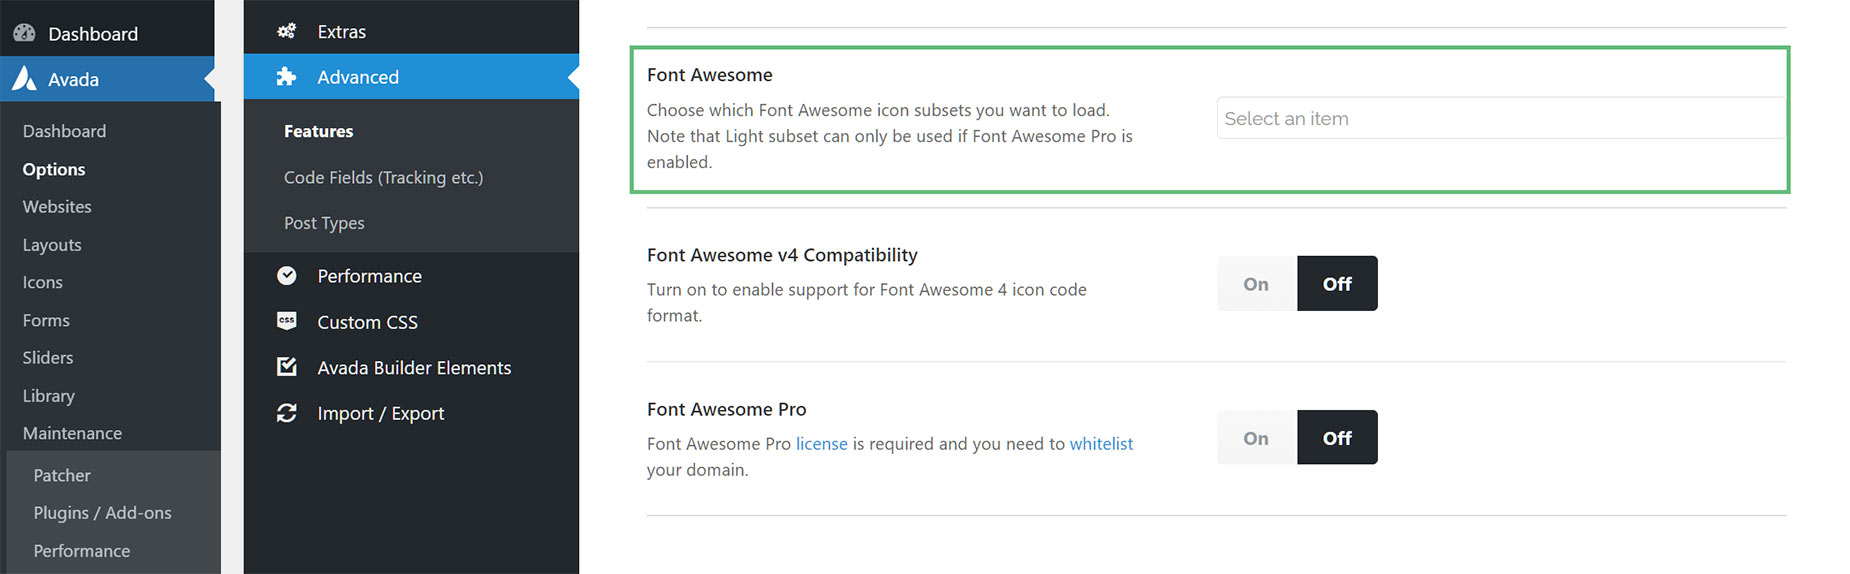 Turn Off Font Awesome Icon Subsets